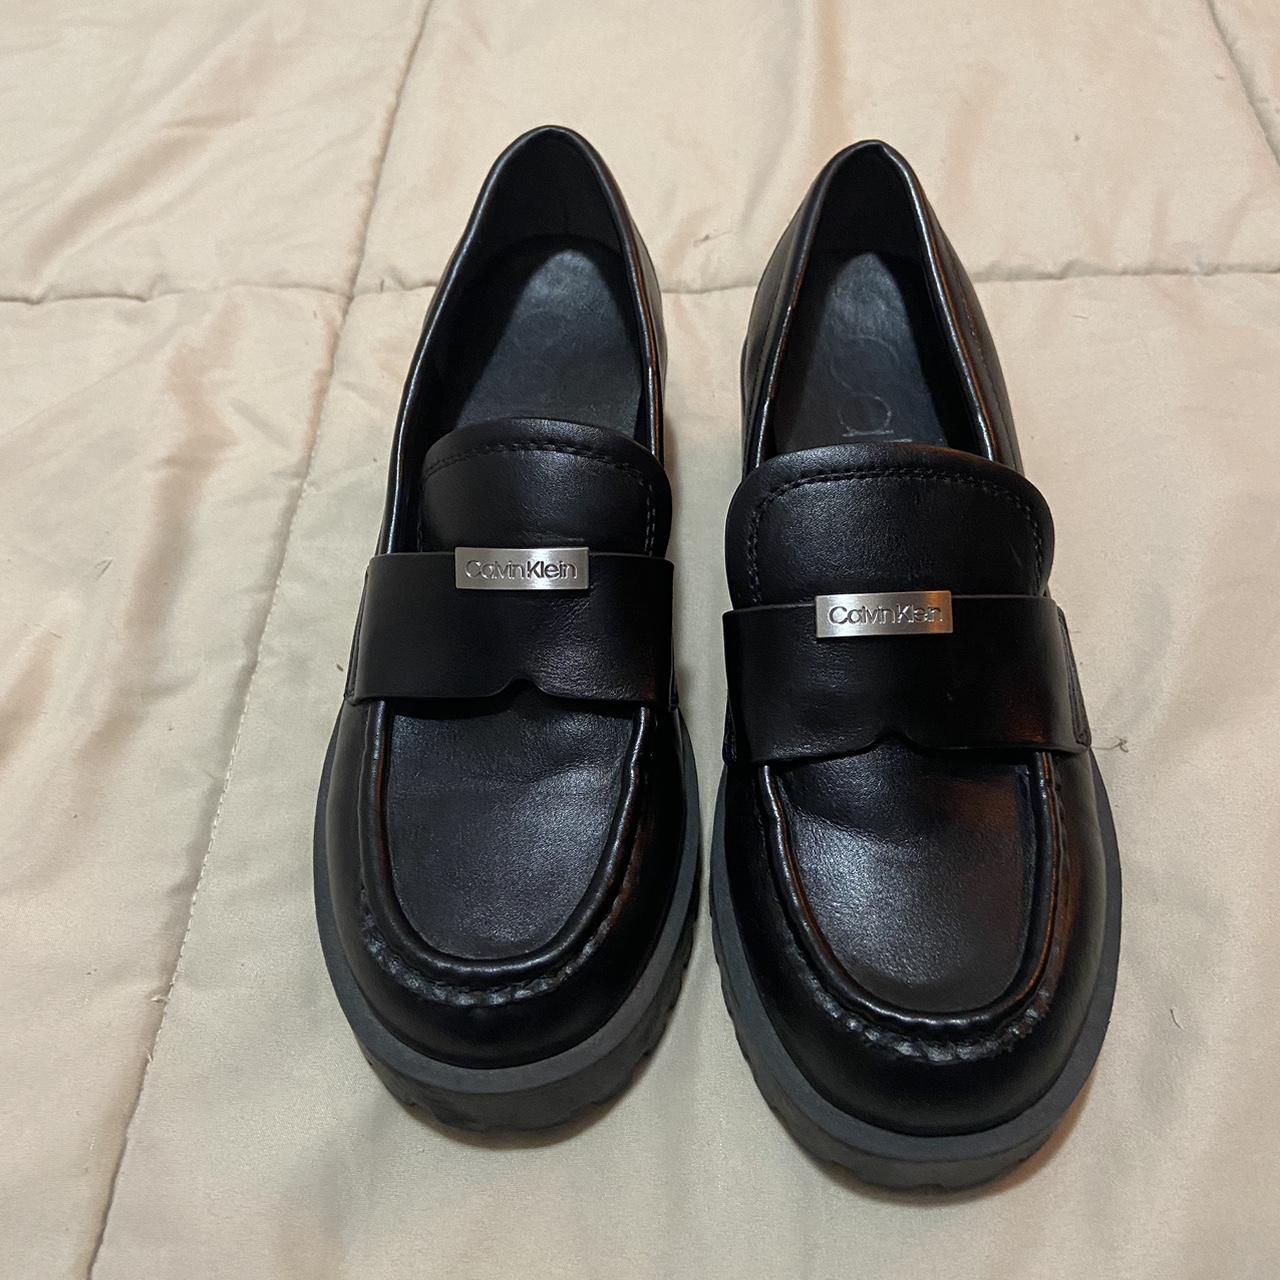 Calvin Klein Loafers - • Had them for years, don’t... - Depop